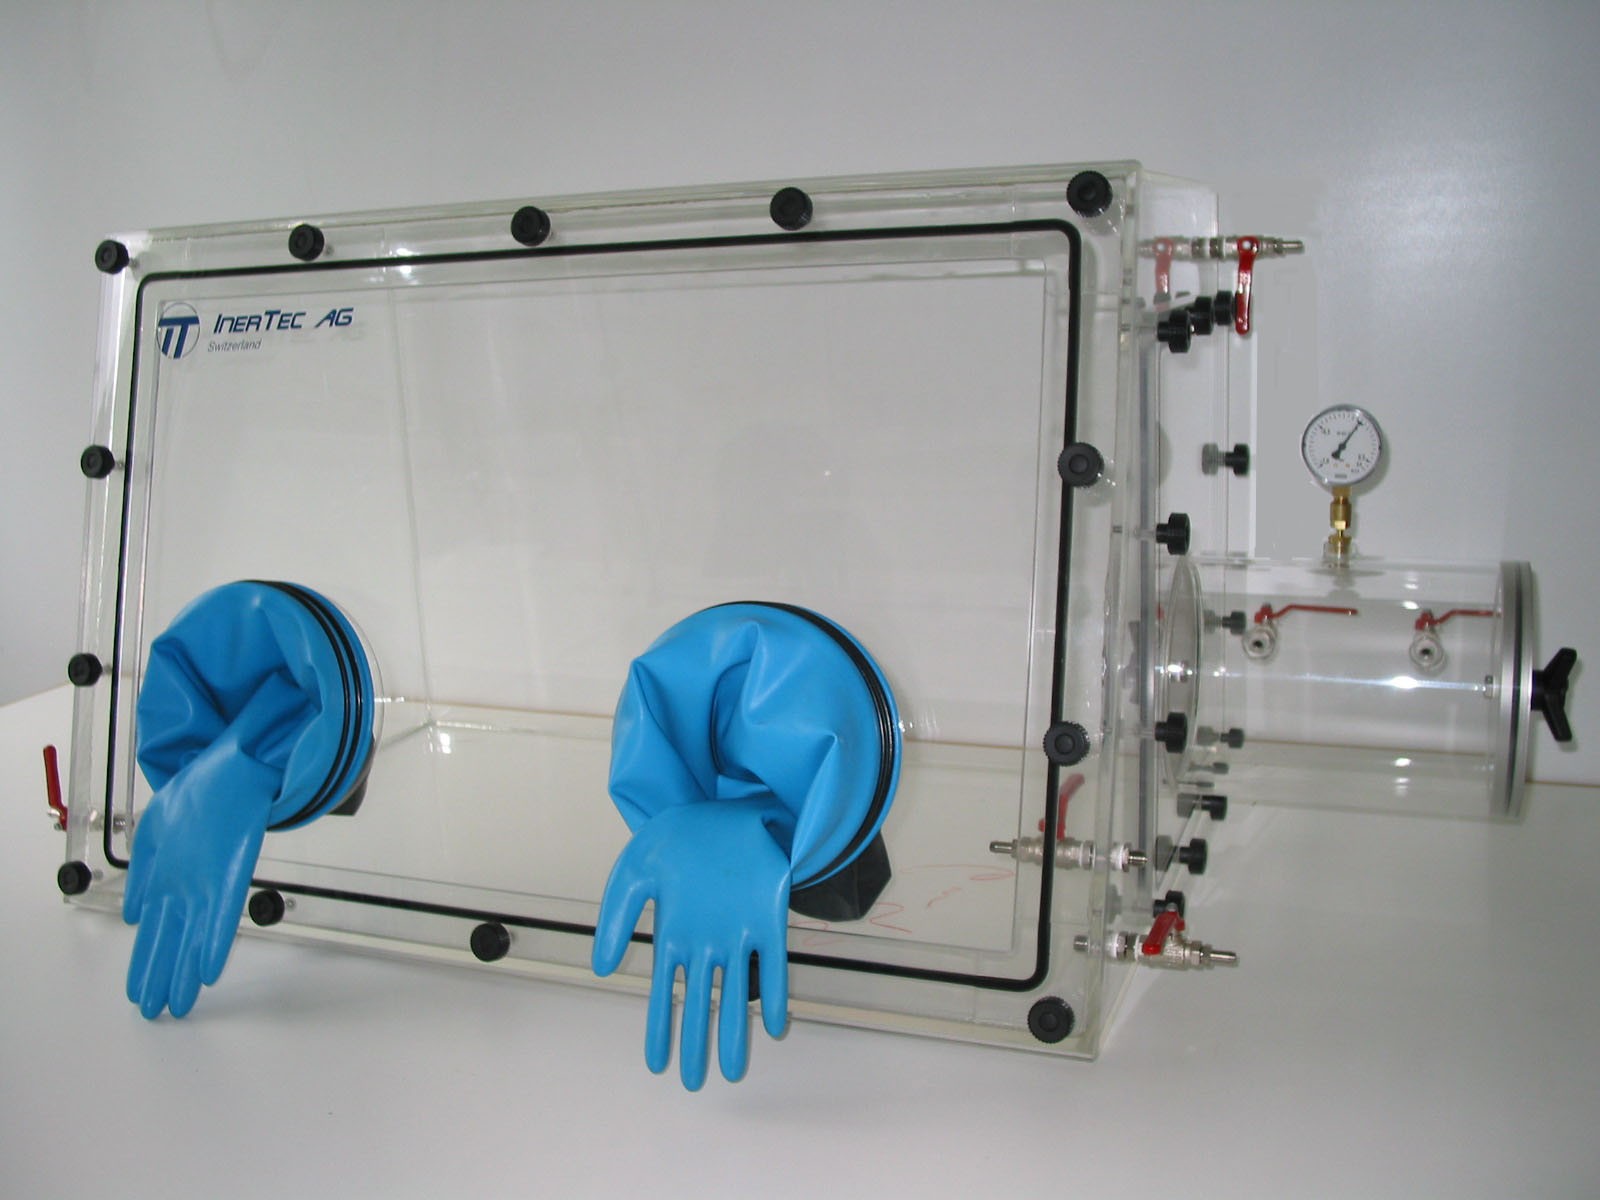 Glovebox made of acrylic&gt; Gas filling: automatic flushing with pressure control, front version: standard, side version: rectangular lock control: humidity controller and oxygen display with data logger